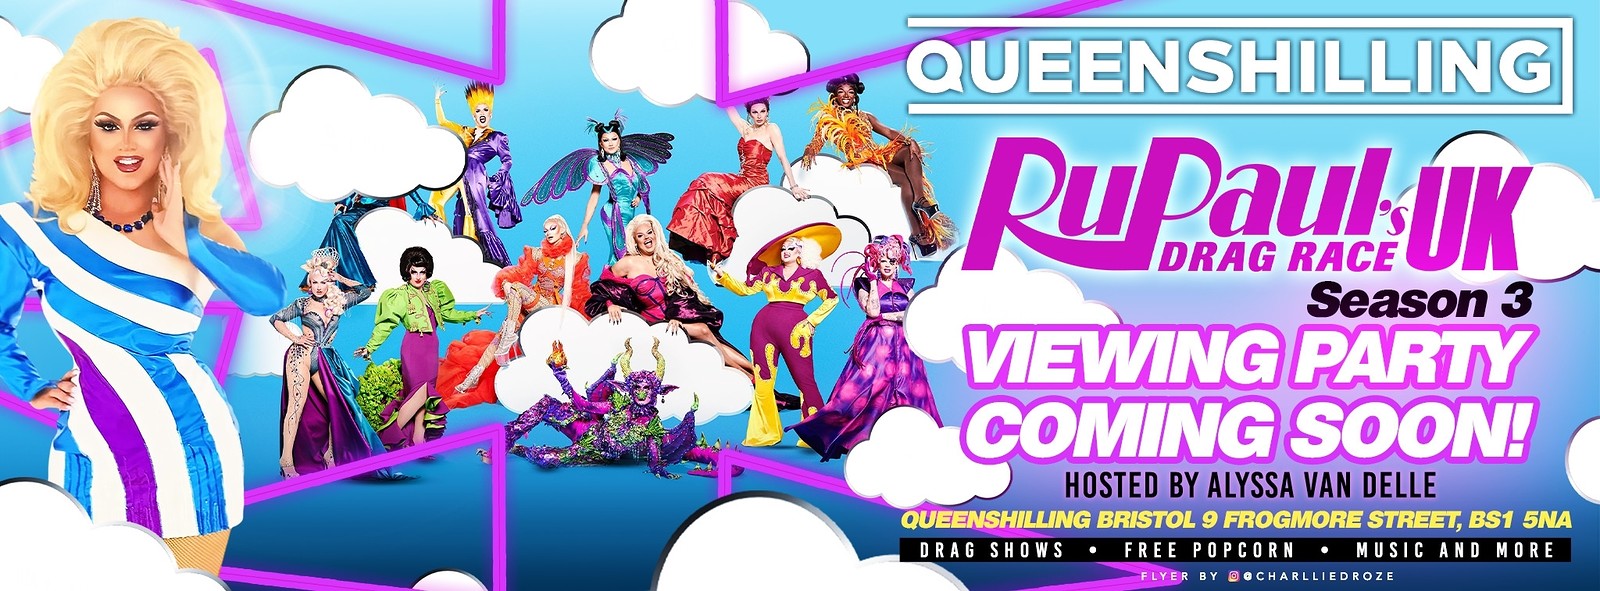 Rupauls drag race UK viewing party Episode 3 at Queenshilling